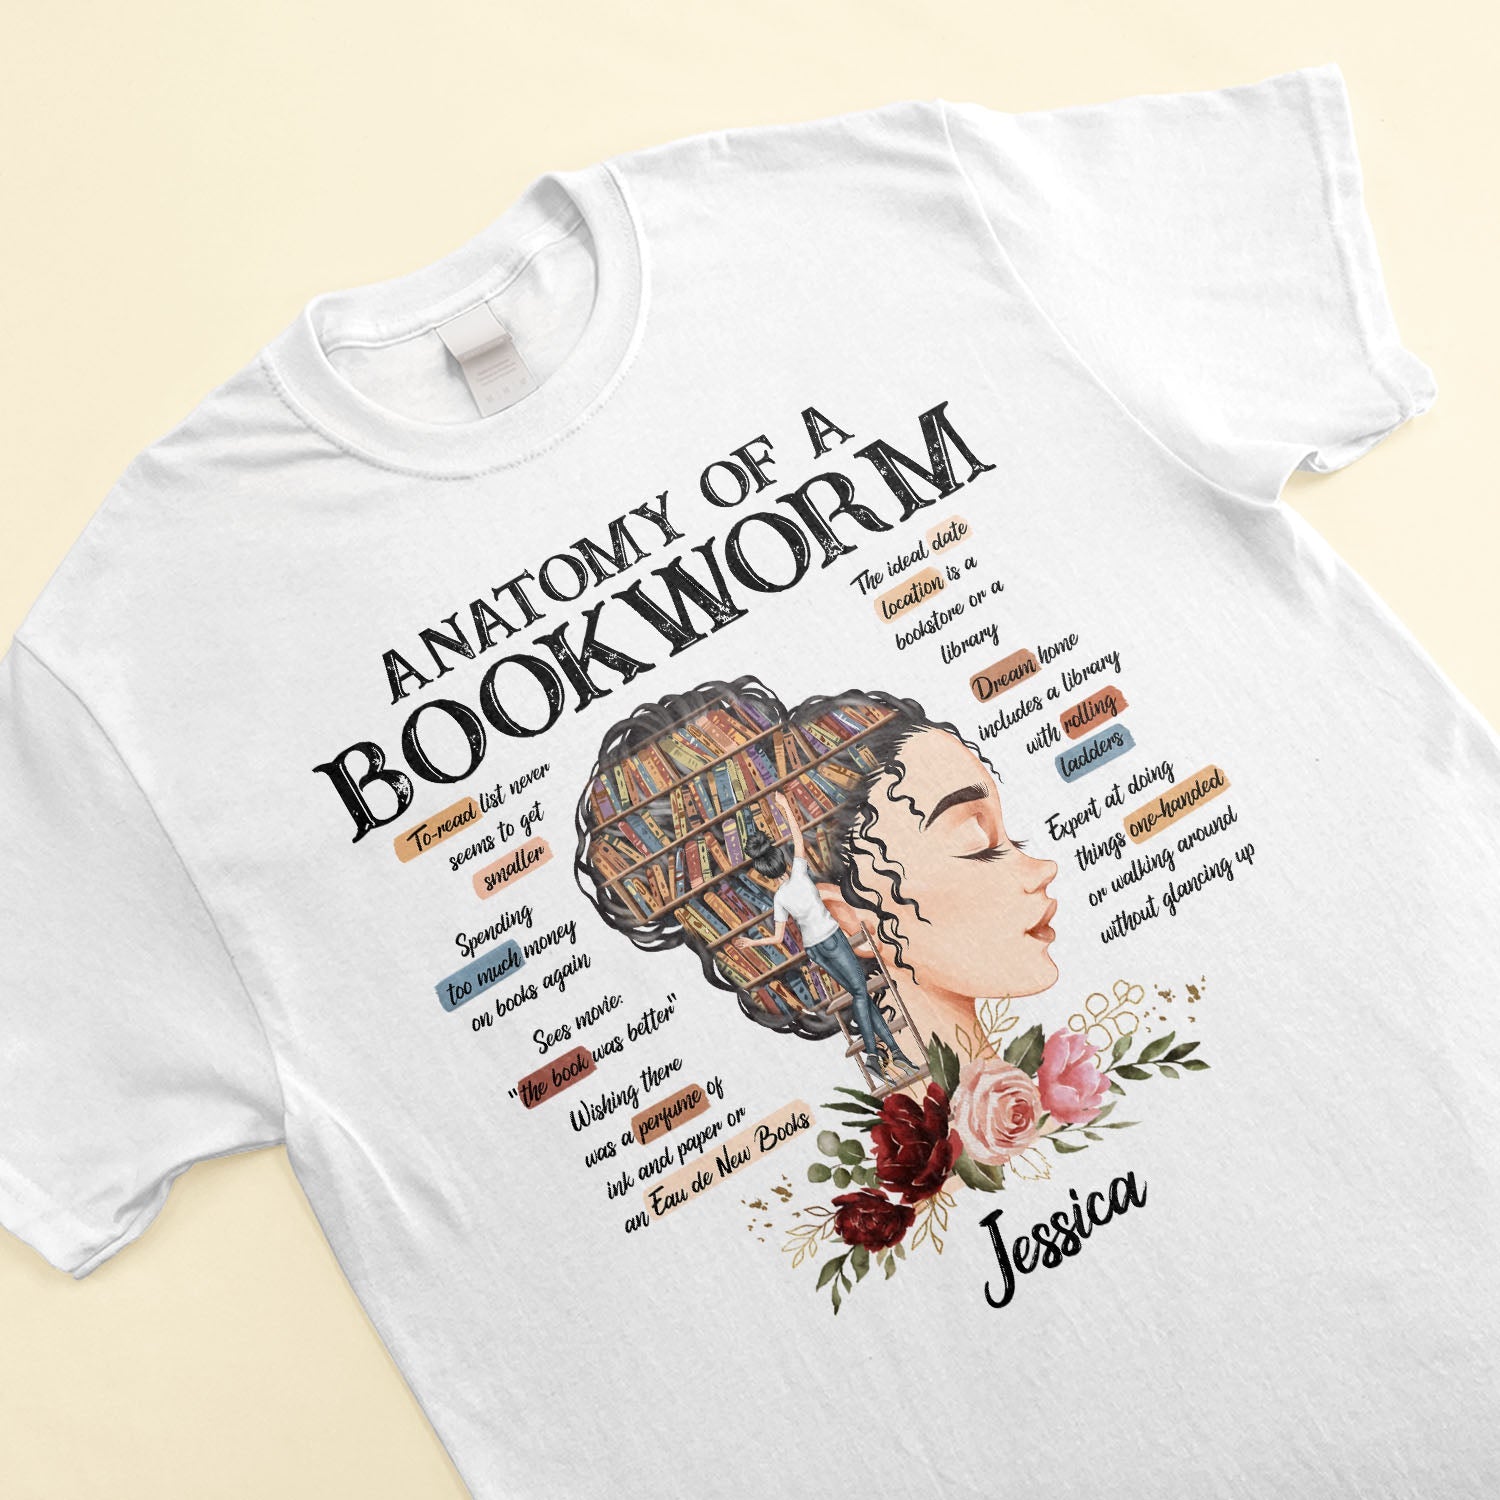 Anatomy Of A Bookworm Poster, Book Poster, Bookish Gifts